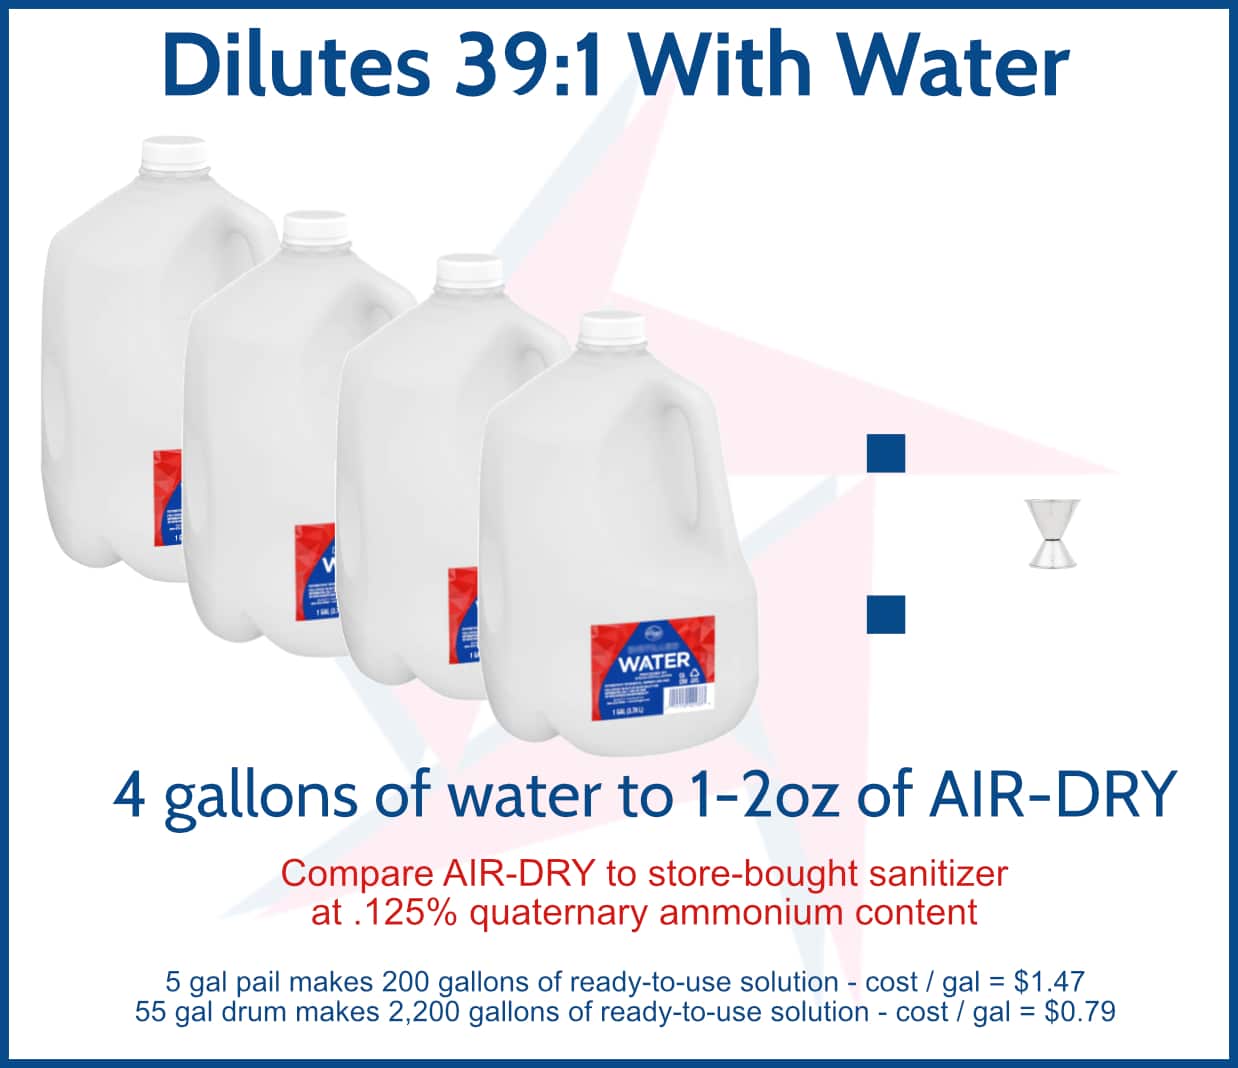 Air-Dry Dilutes 39:1